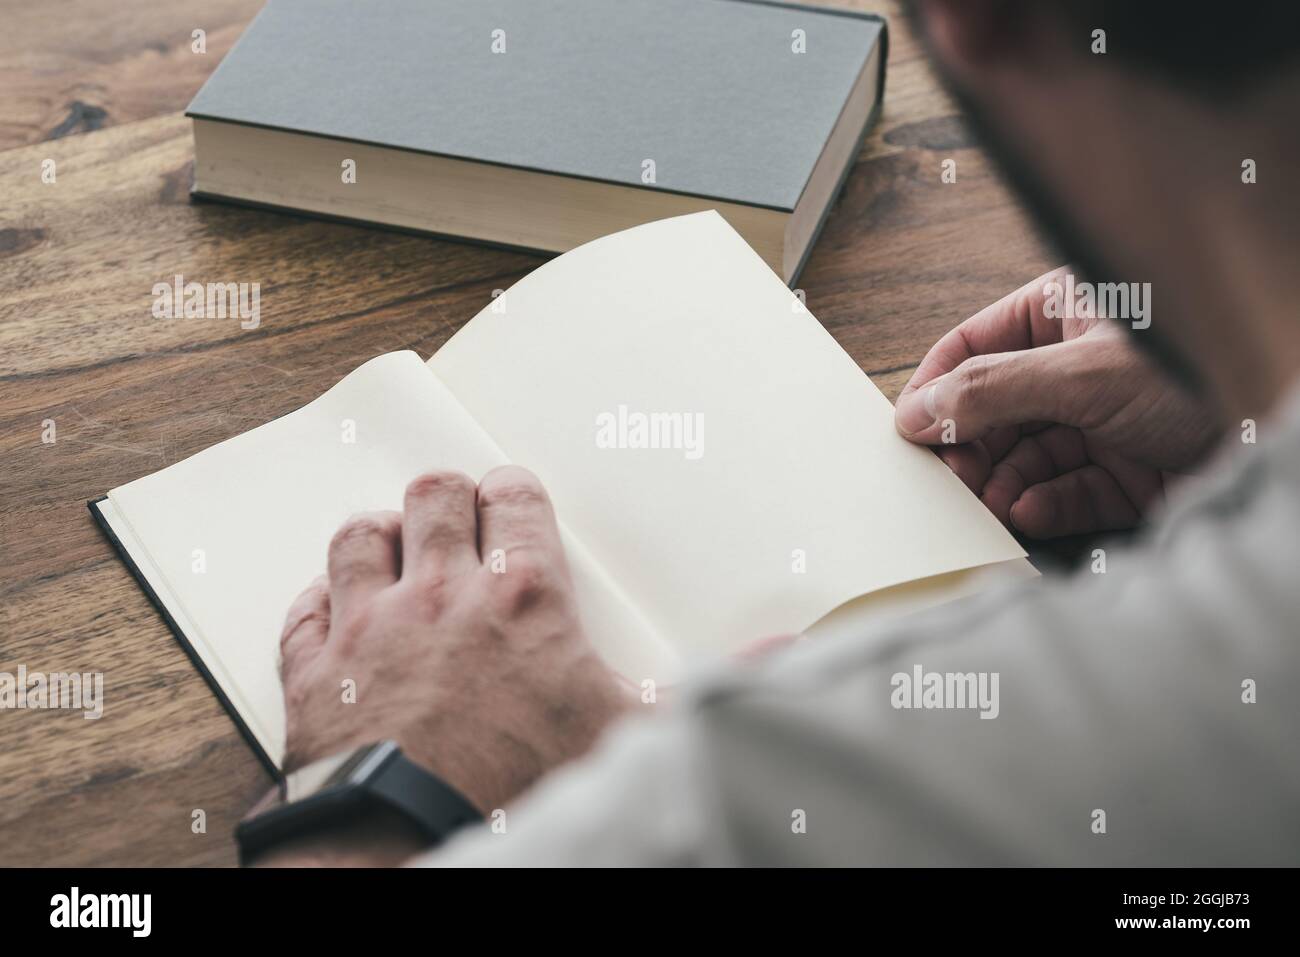 over the shoulder view of person sitting an wooden table reading a book Stock Photo